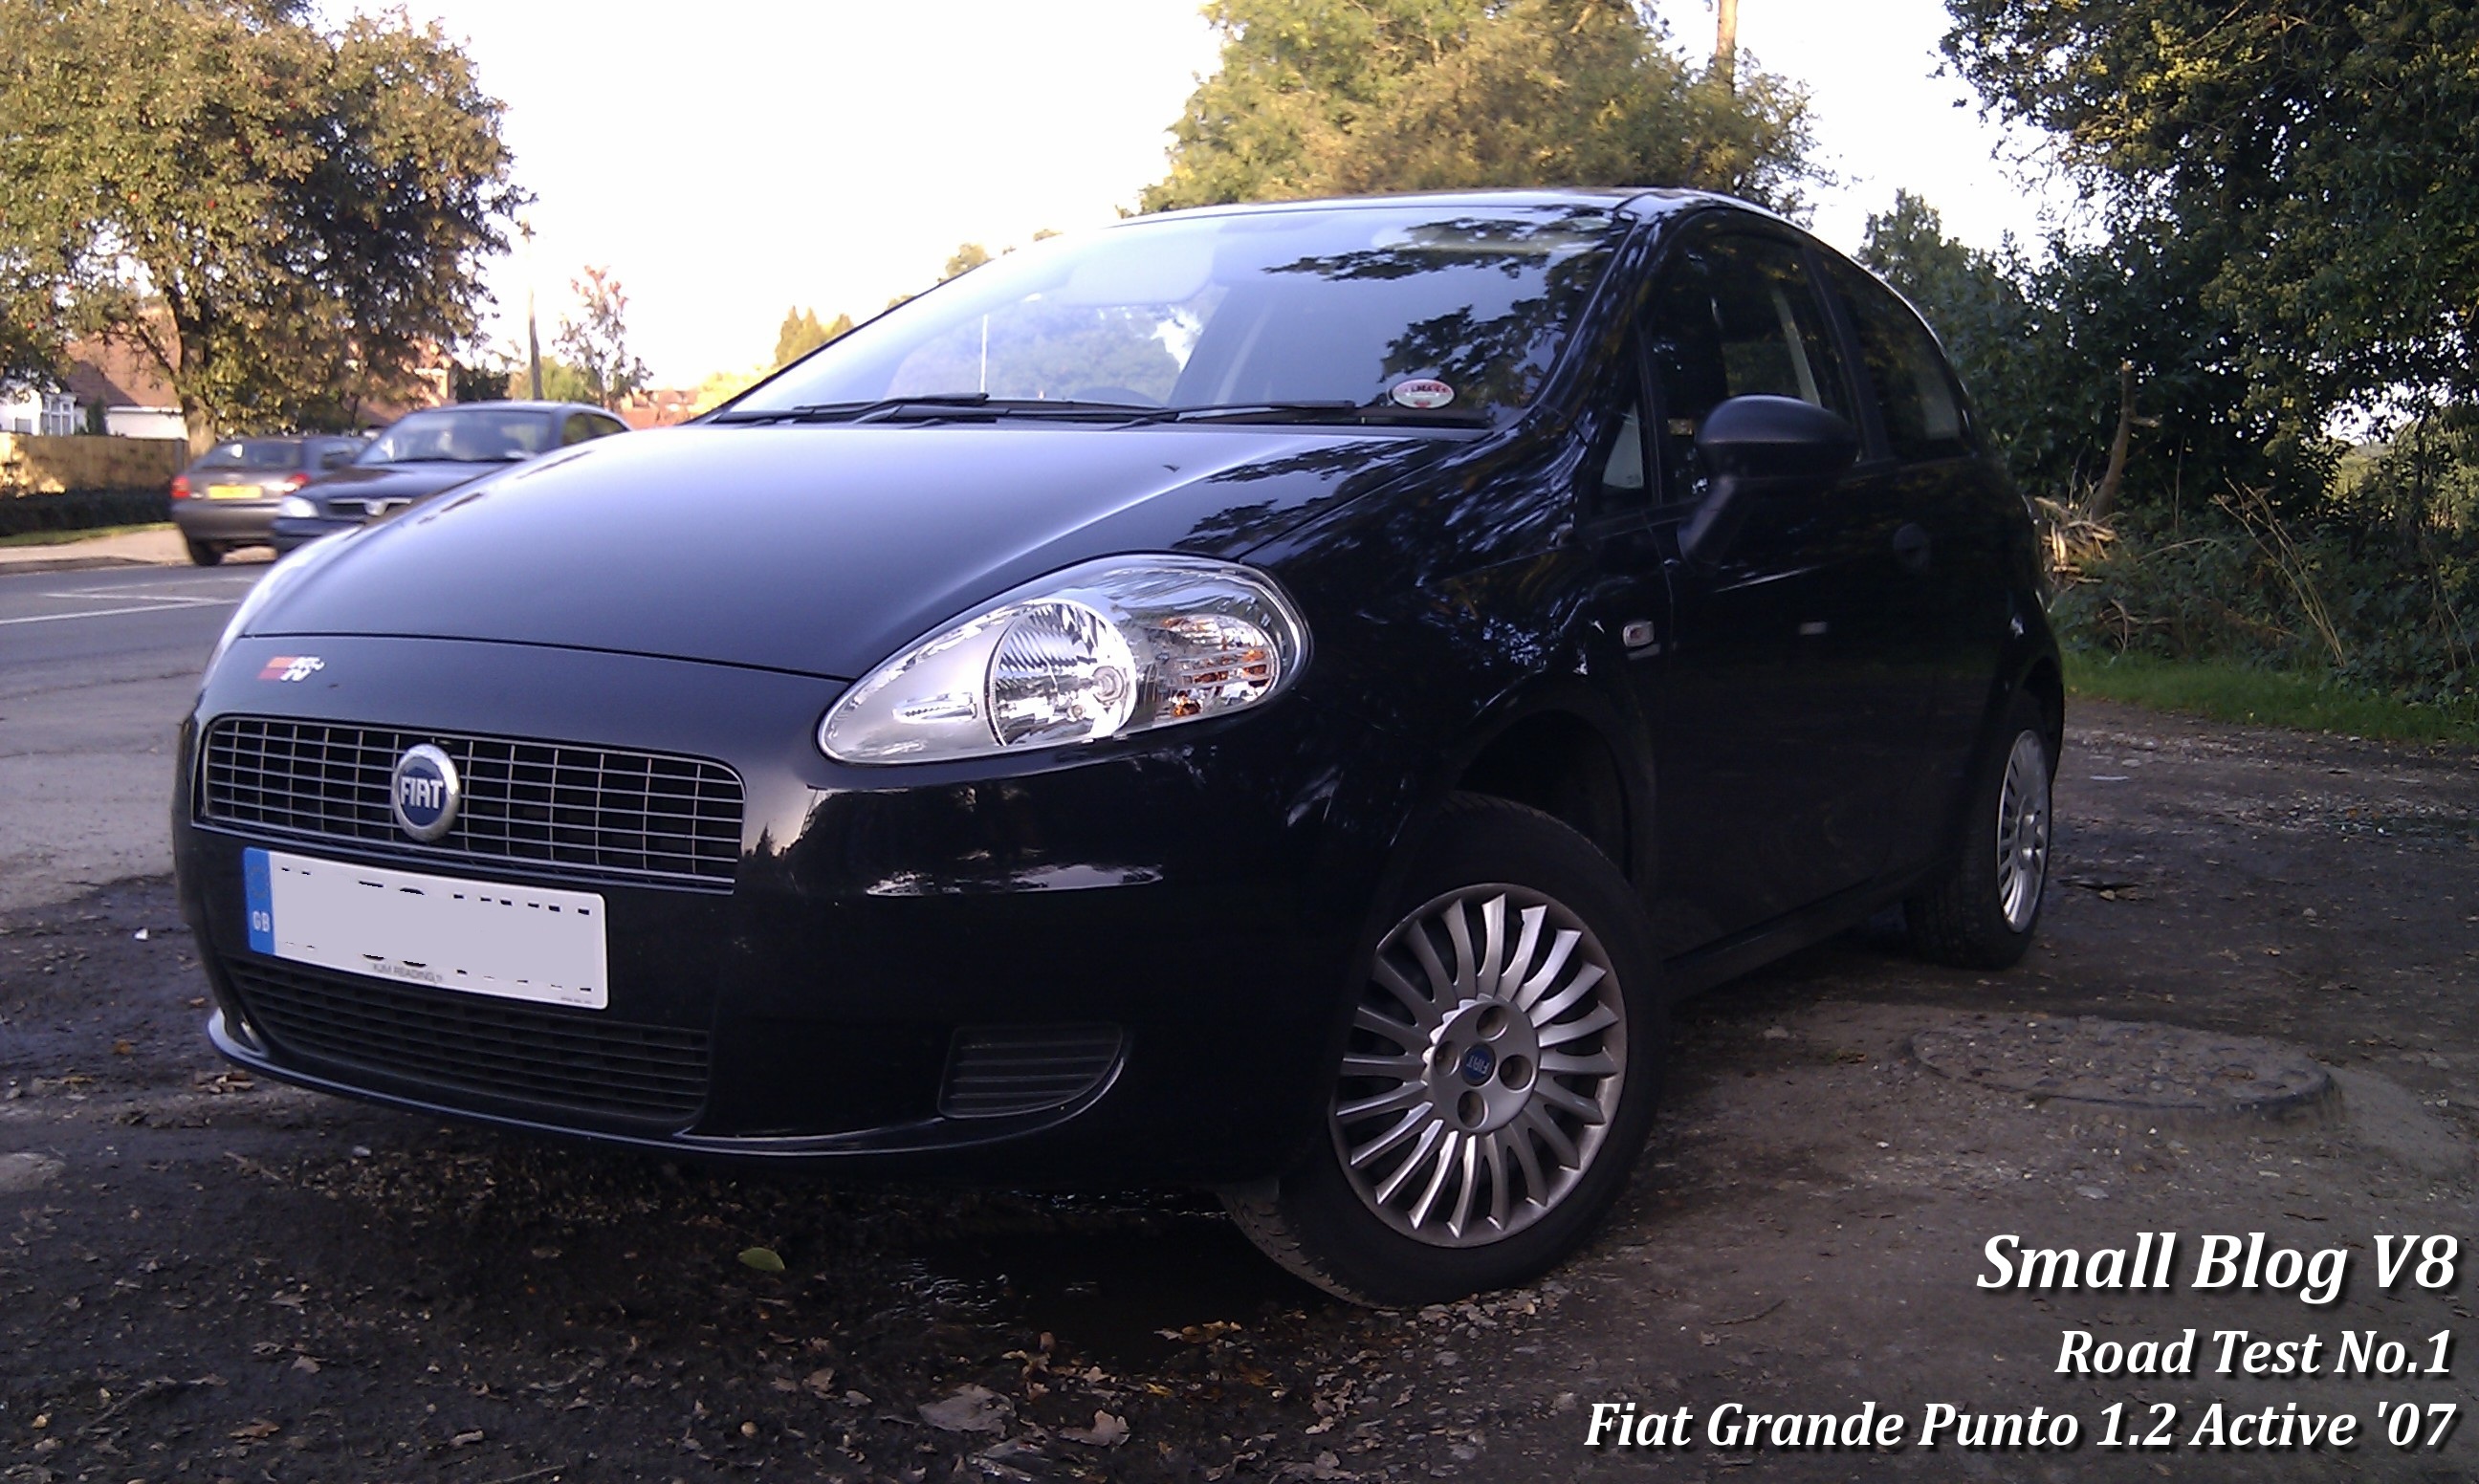 200th Post - Real Road Test: Fiat Grande Punto 1.2 Active